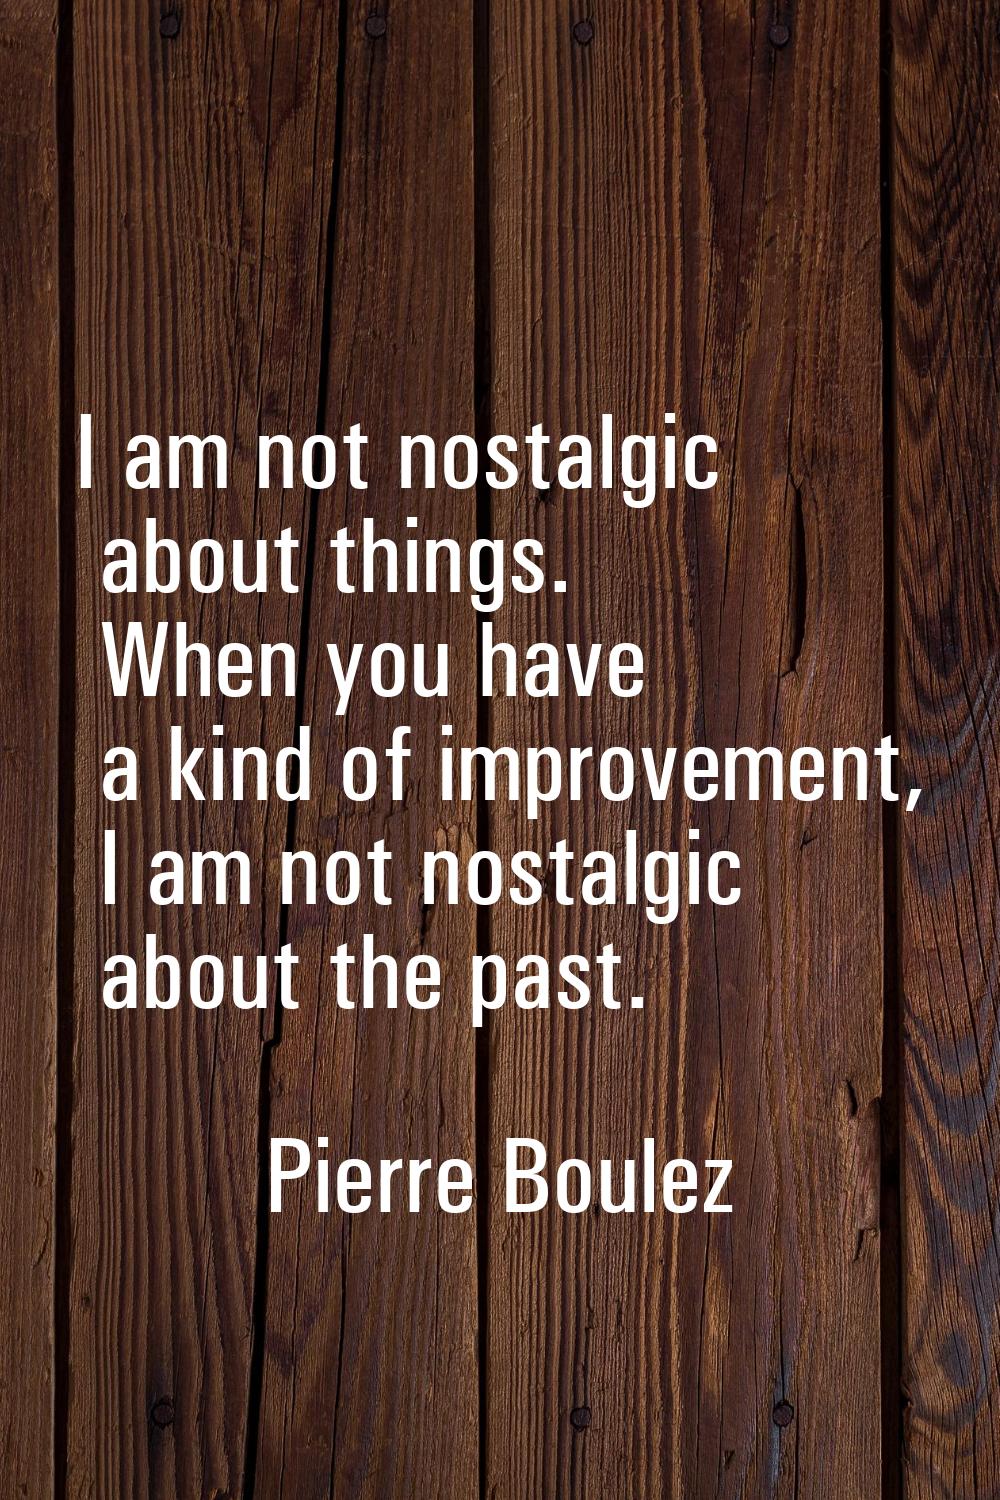 I am not nostalgic about things. When you have a kind of improvement, I am not nostalgic about the 